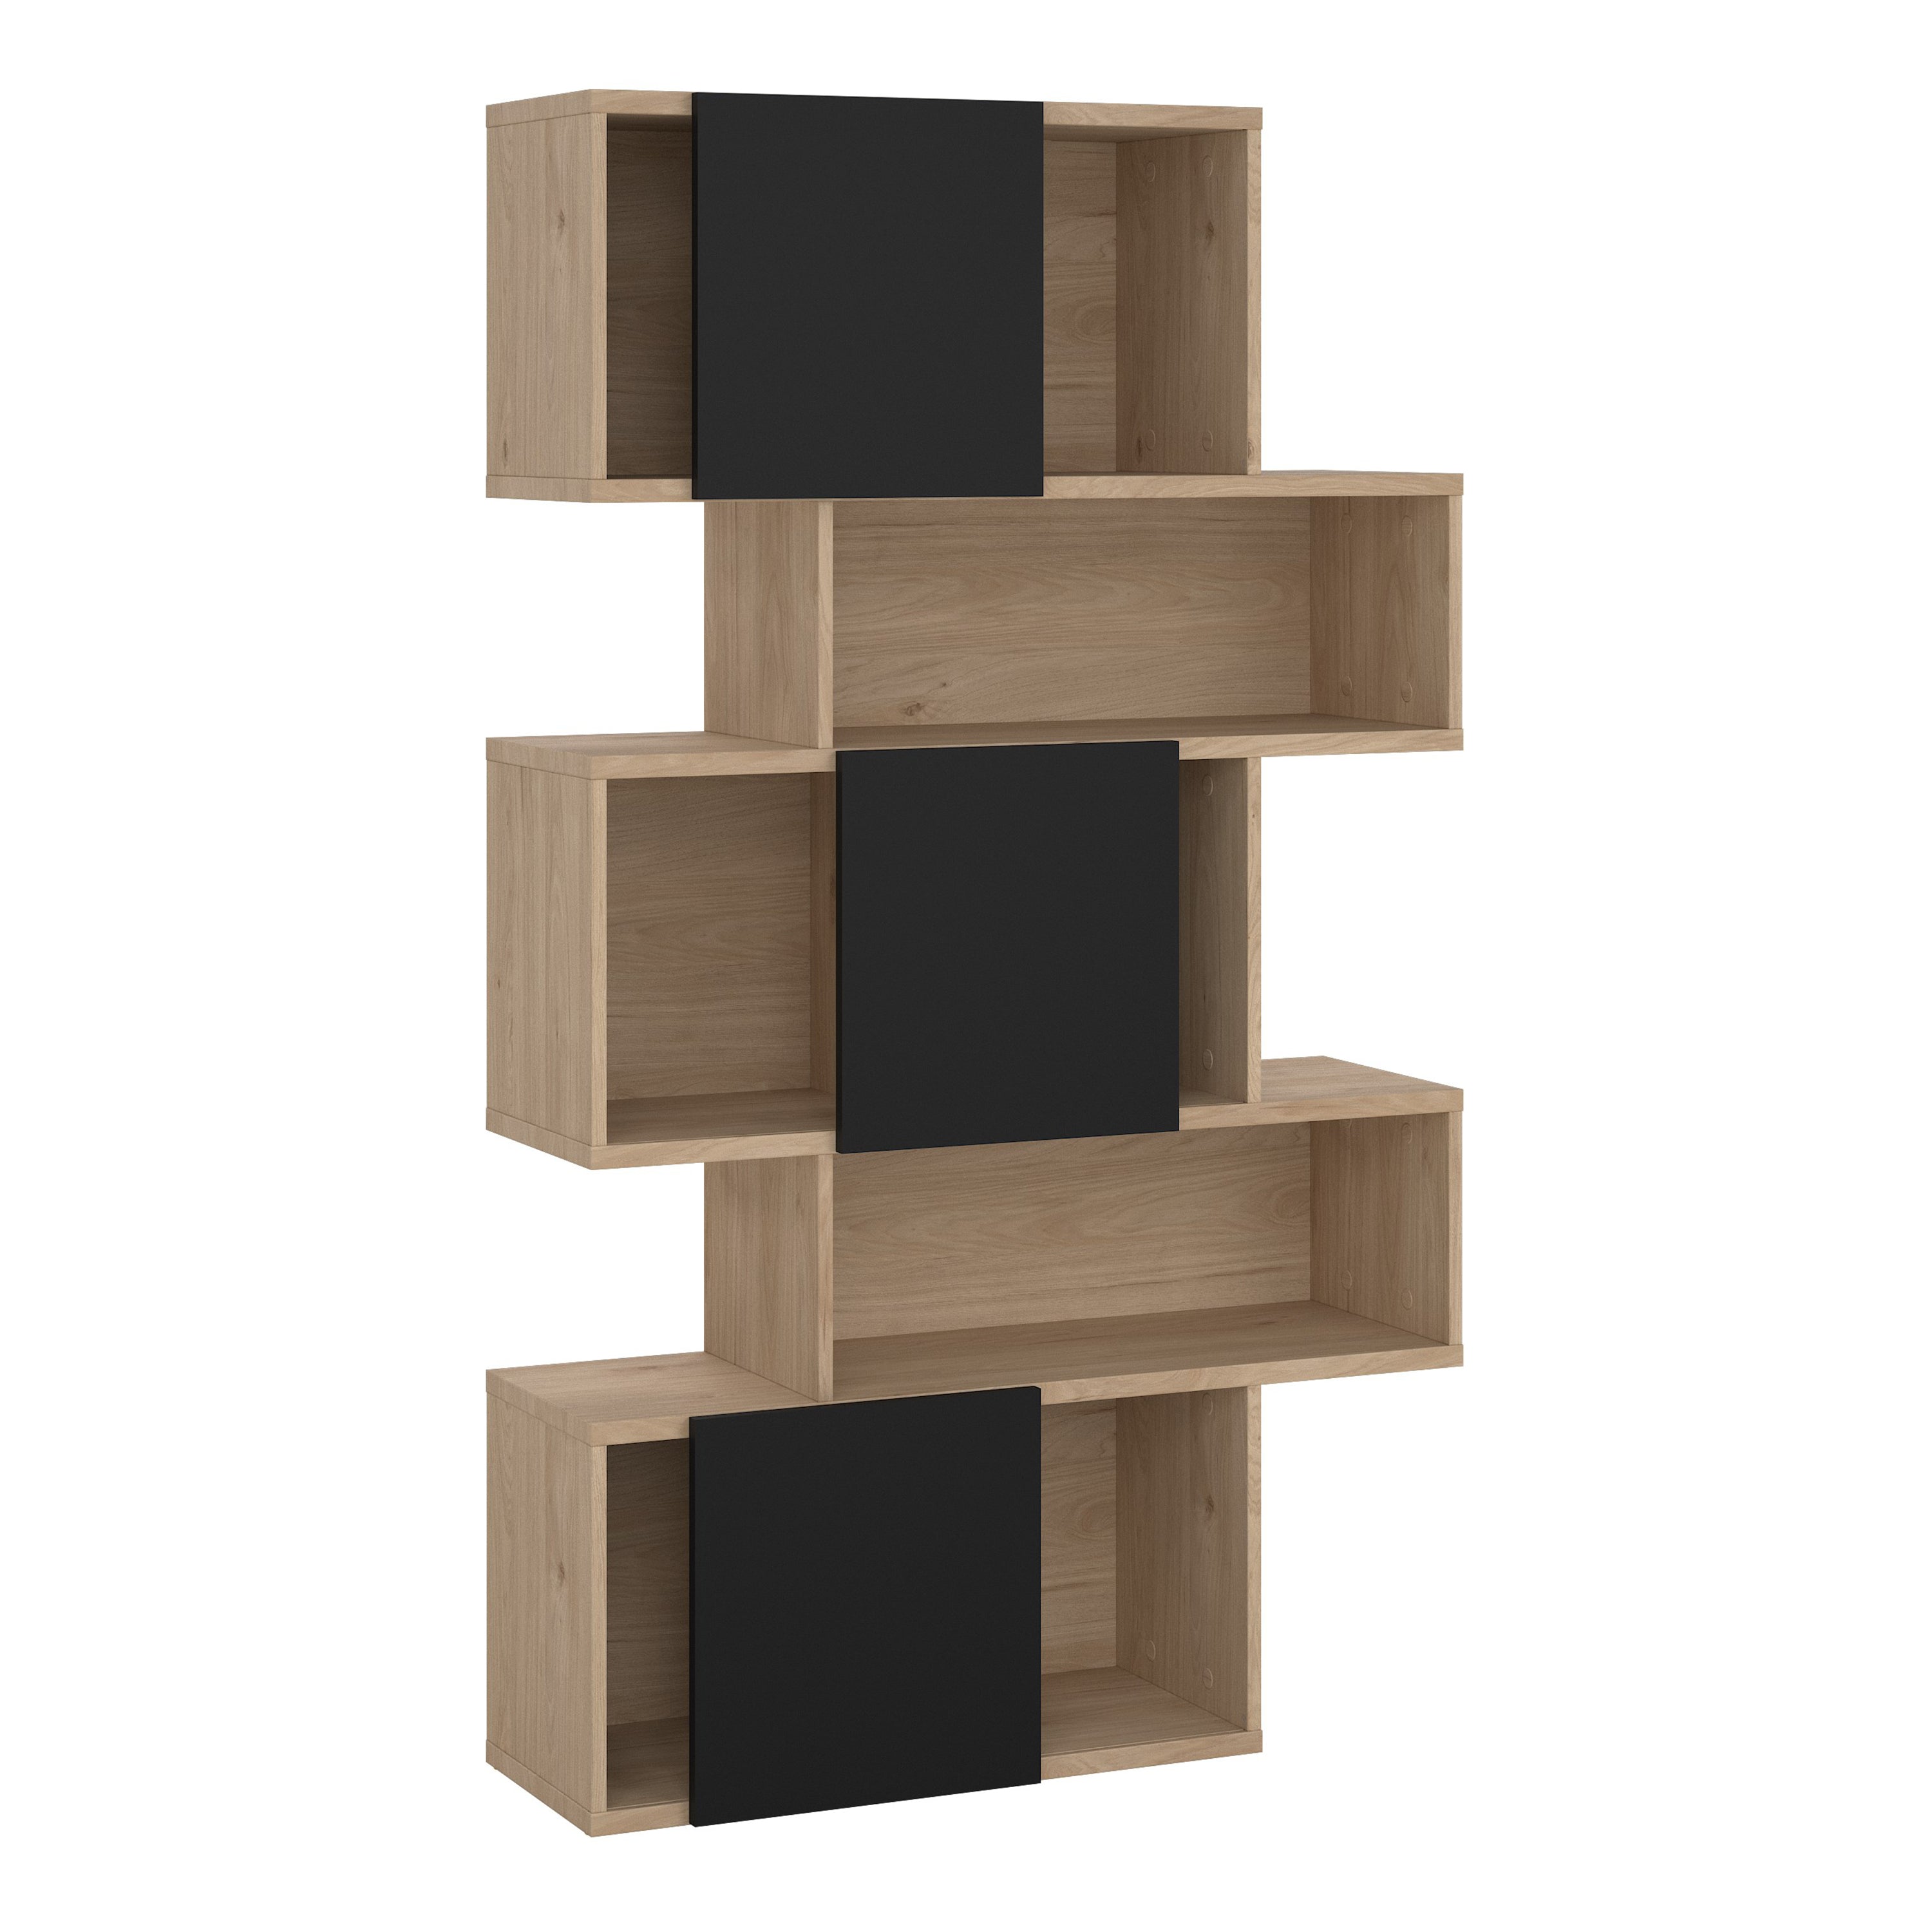 Maze Asymmetrical Bookcase with 3 Doors in Jackson Hickory and Black